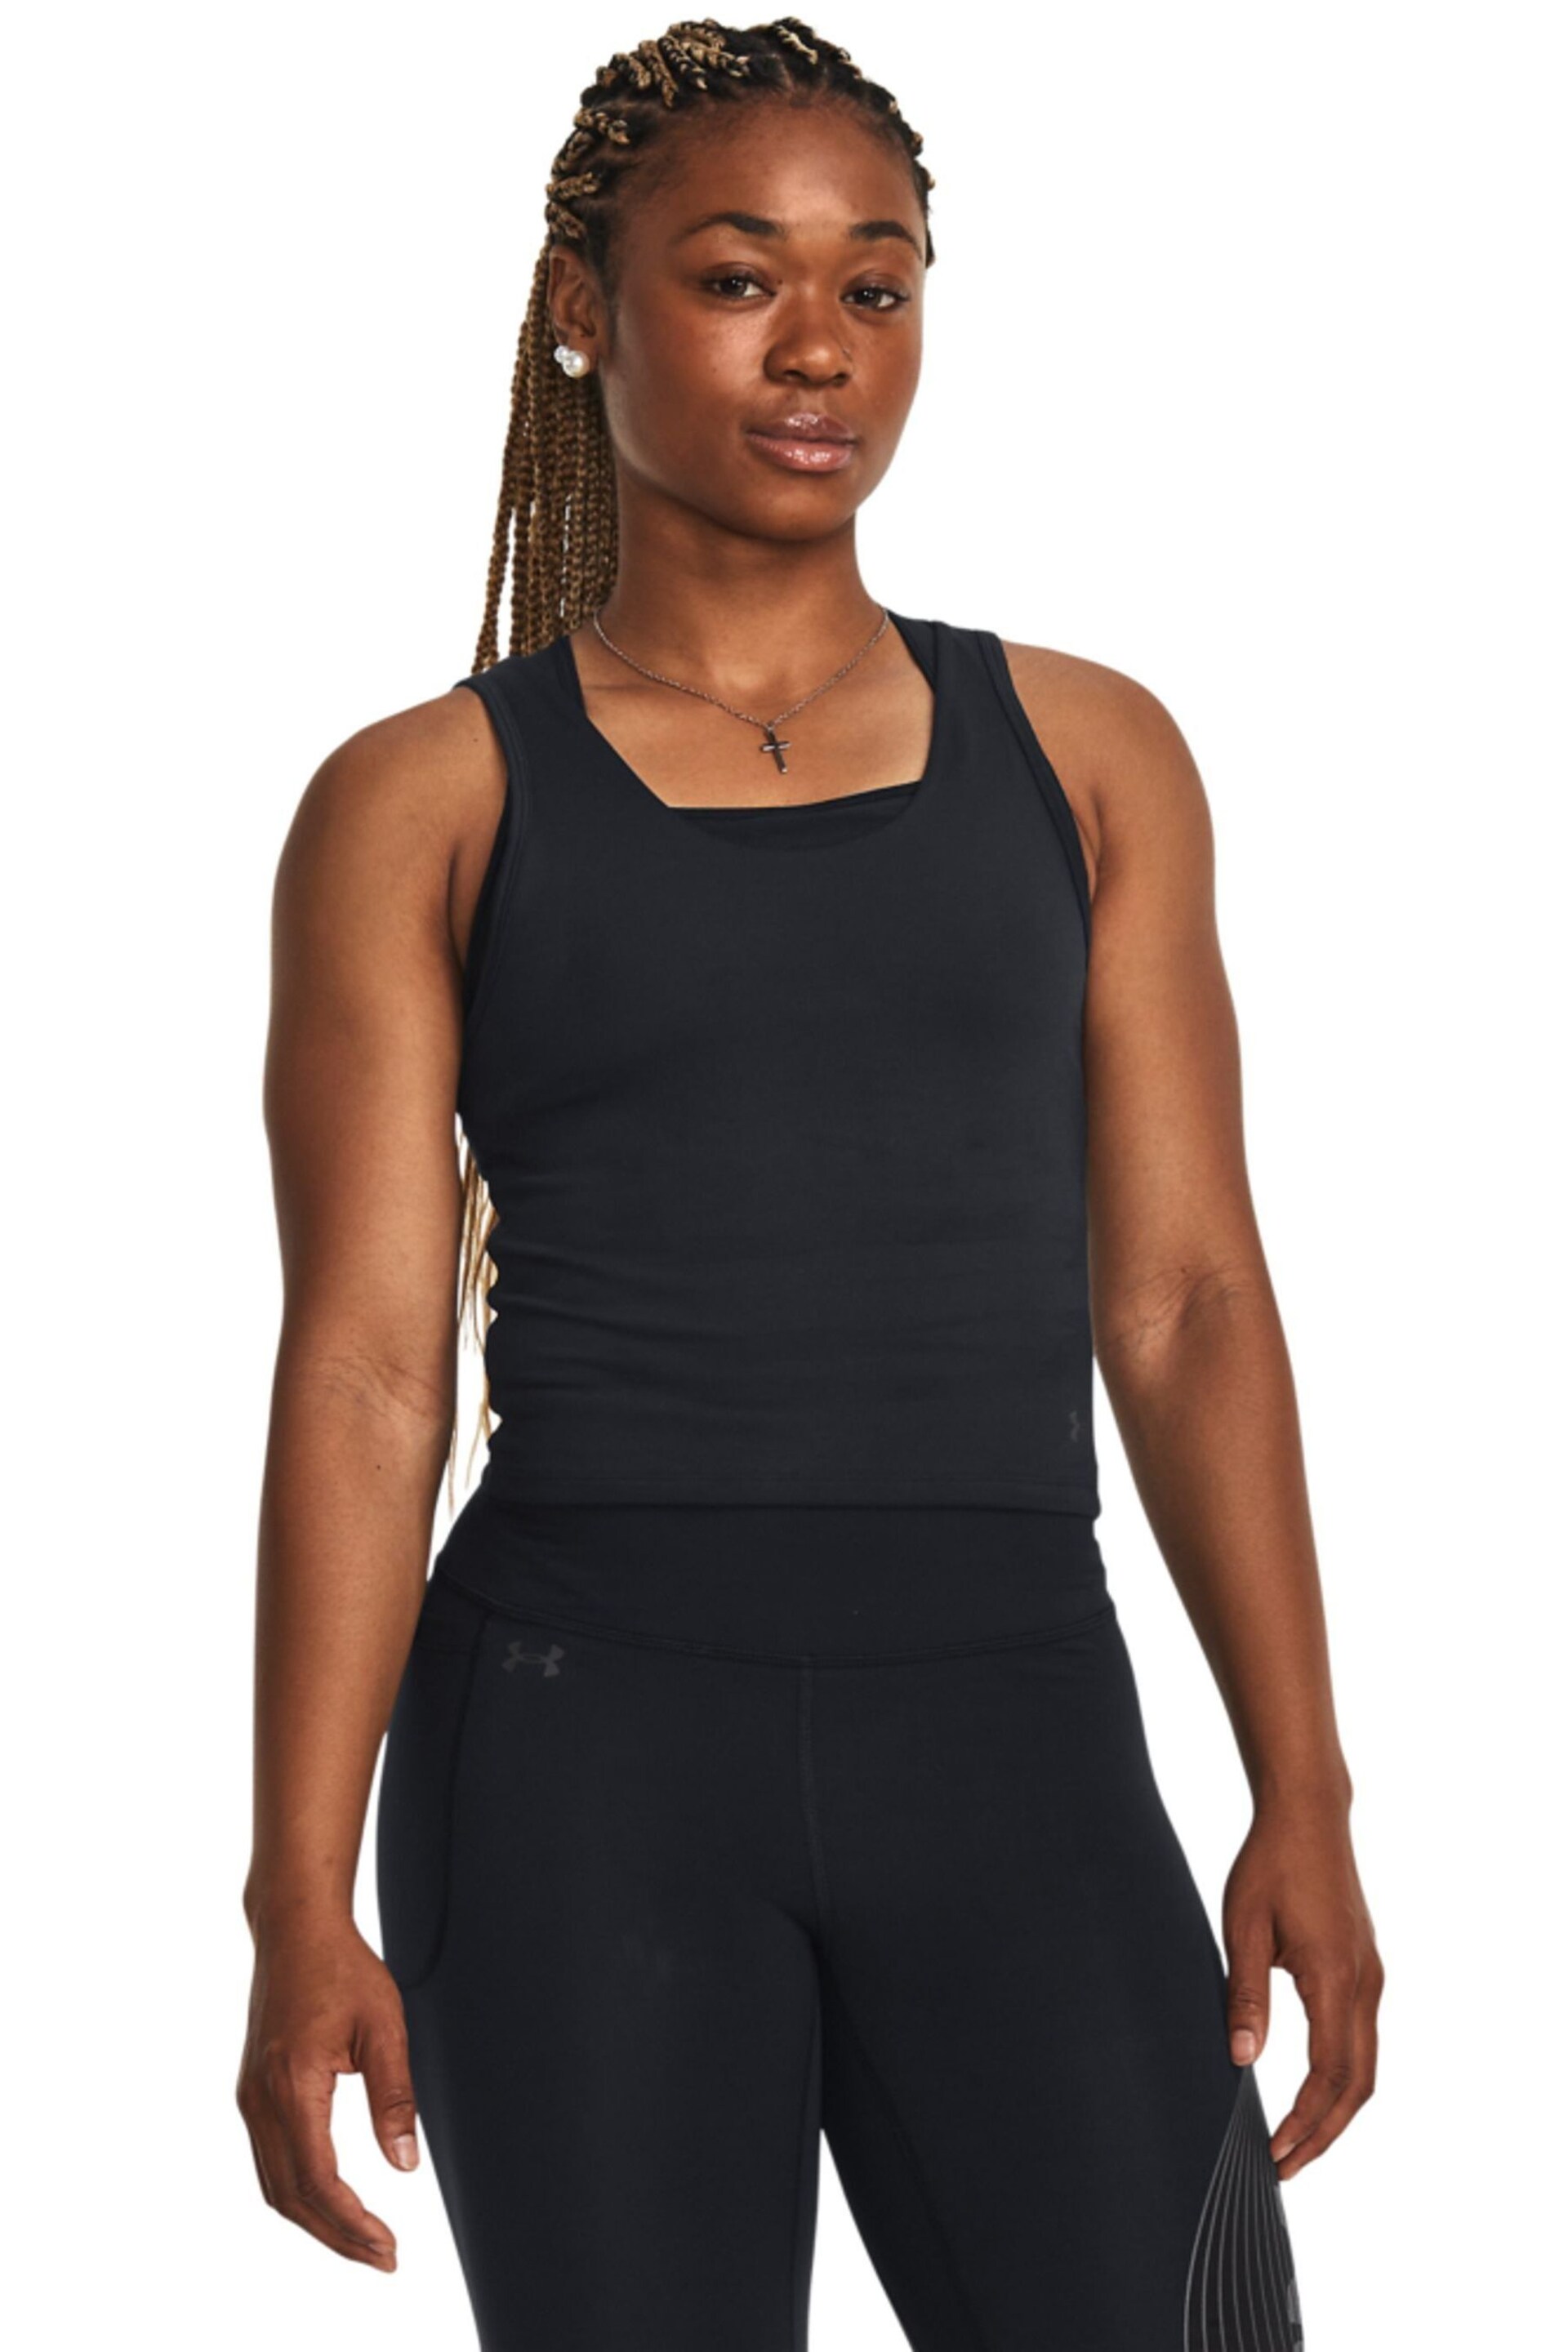 Under Armour Black Motion Crop Top - Image 1 of 6